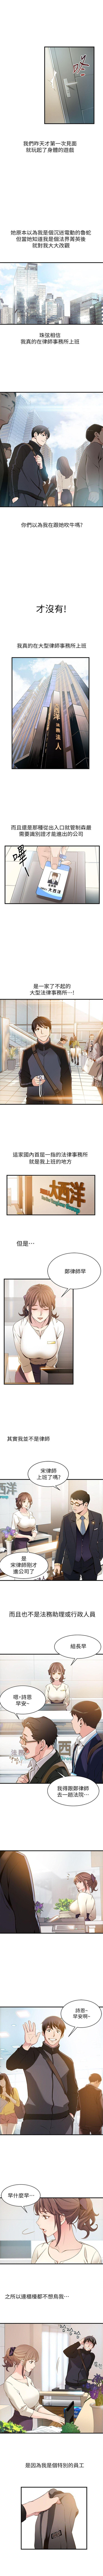 Lesbo 弱點 1-104 官方中文（連載中） Bizarre - Page 4